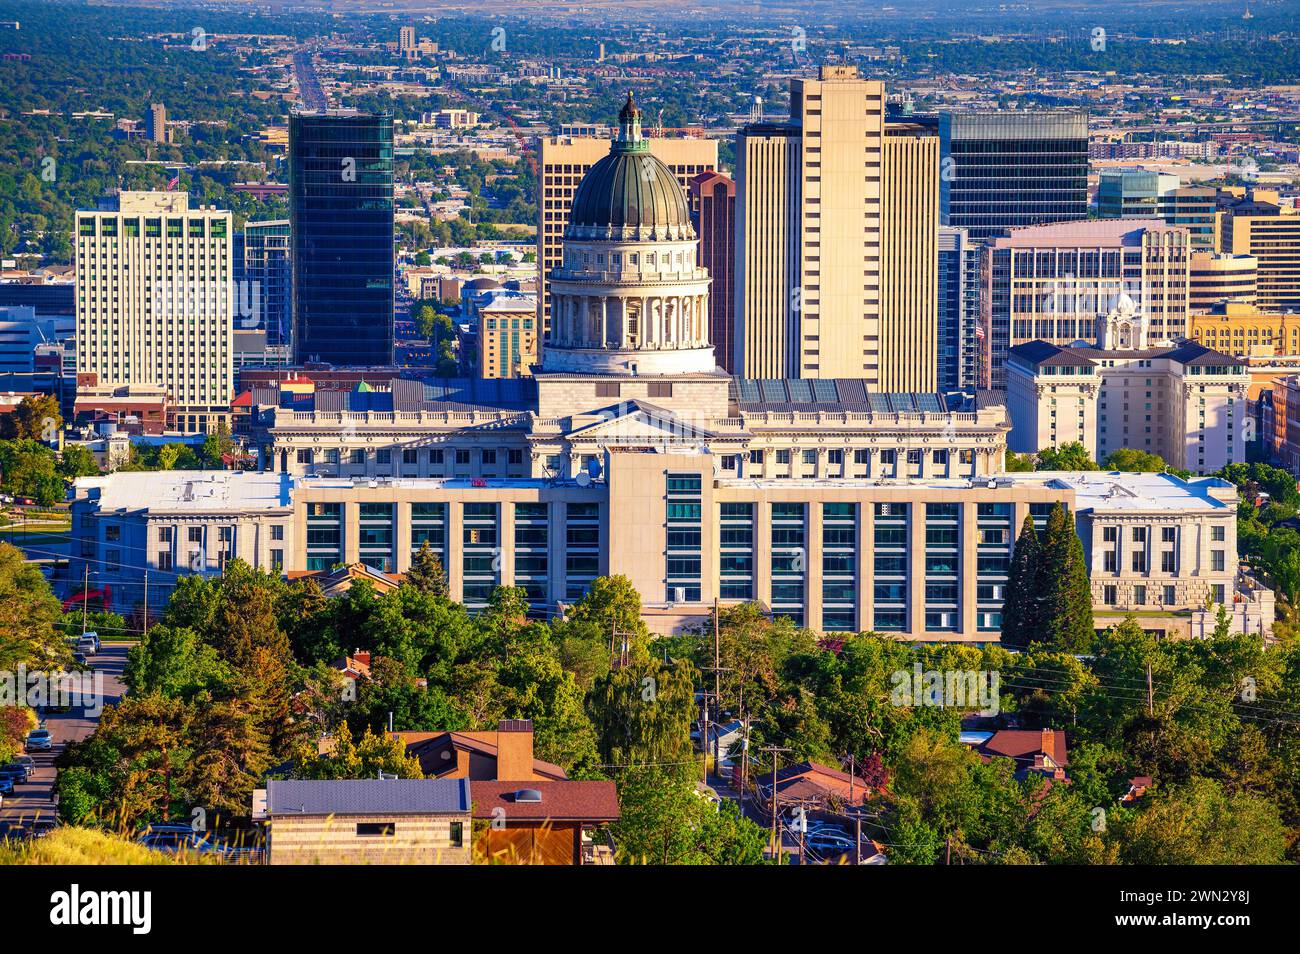 Utah State Capitol building with Salt Lake City skyline in the background. Stock Photo